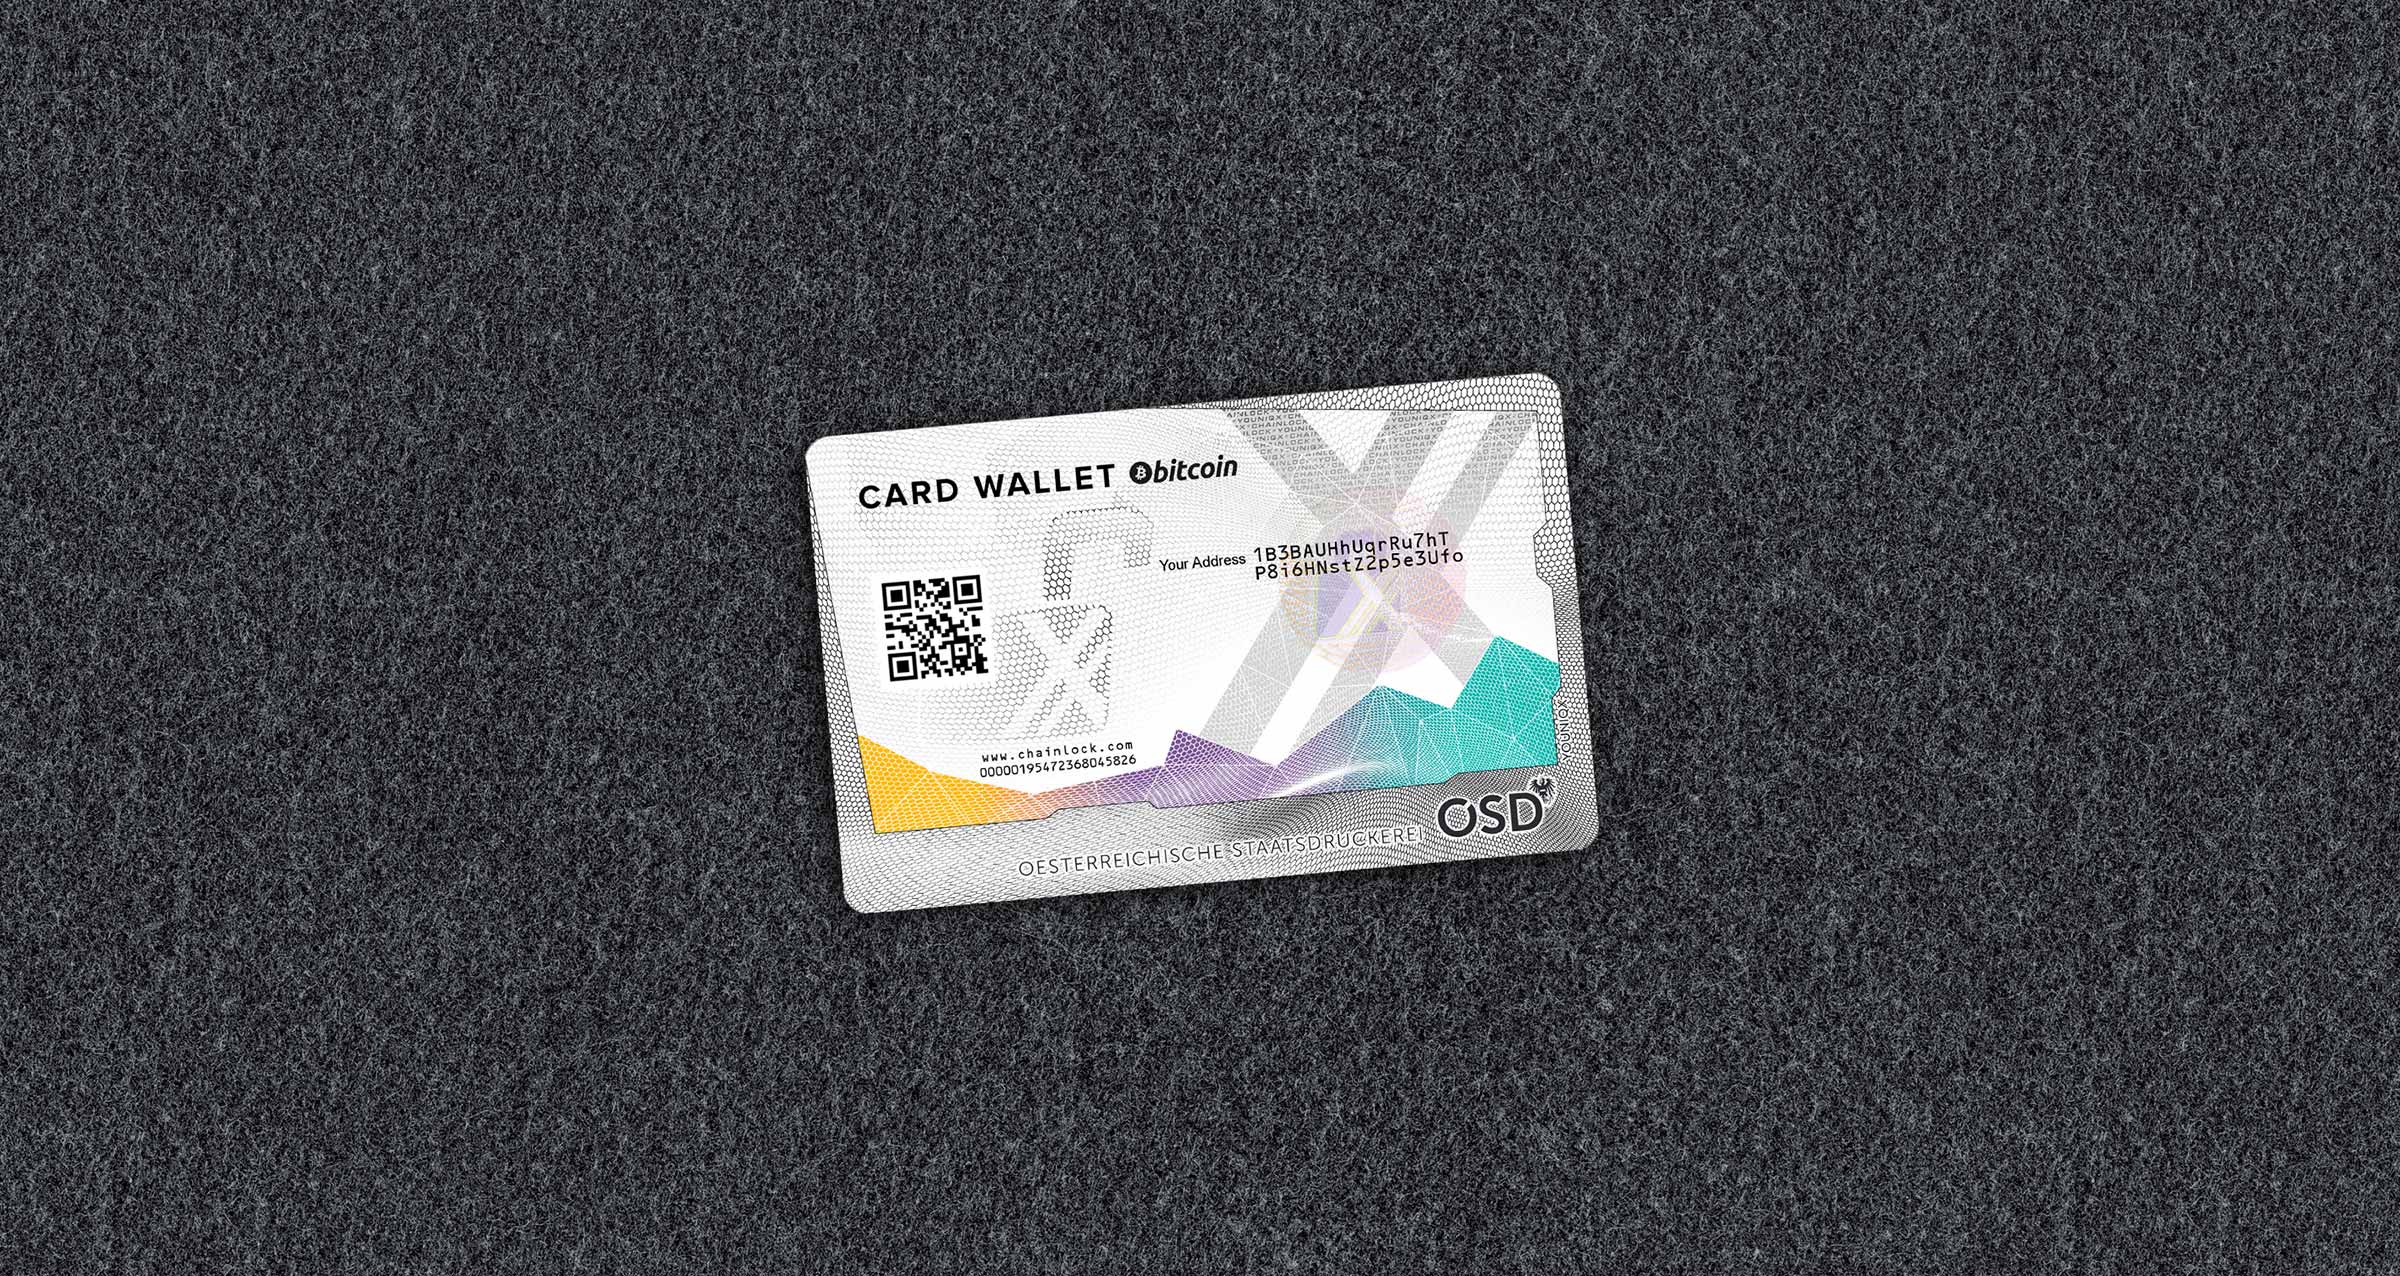 The Card Wallet Bitcoin by Coinfinity, the best cold storage solution retail customers can get